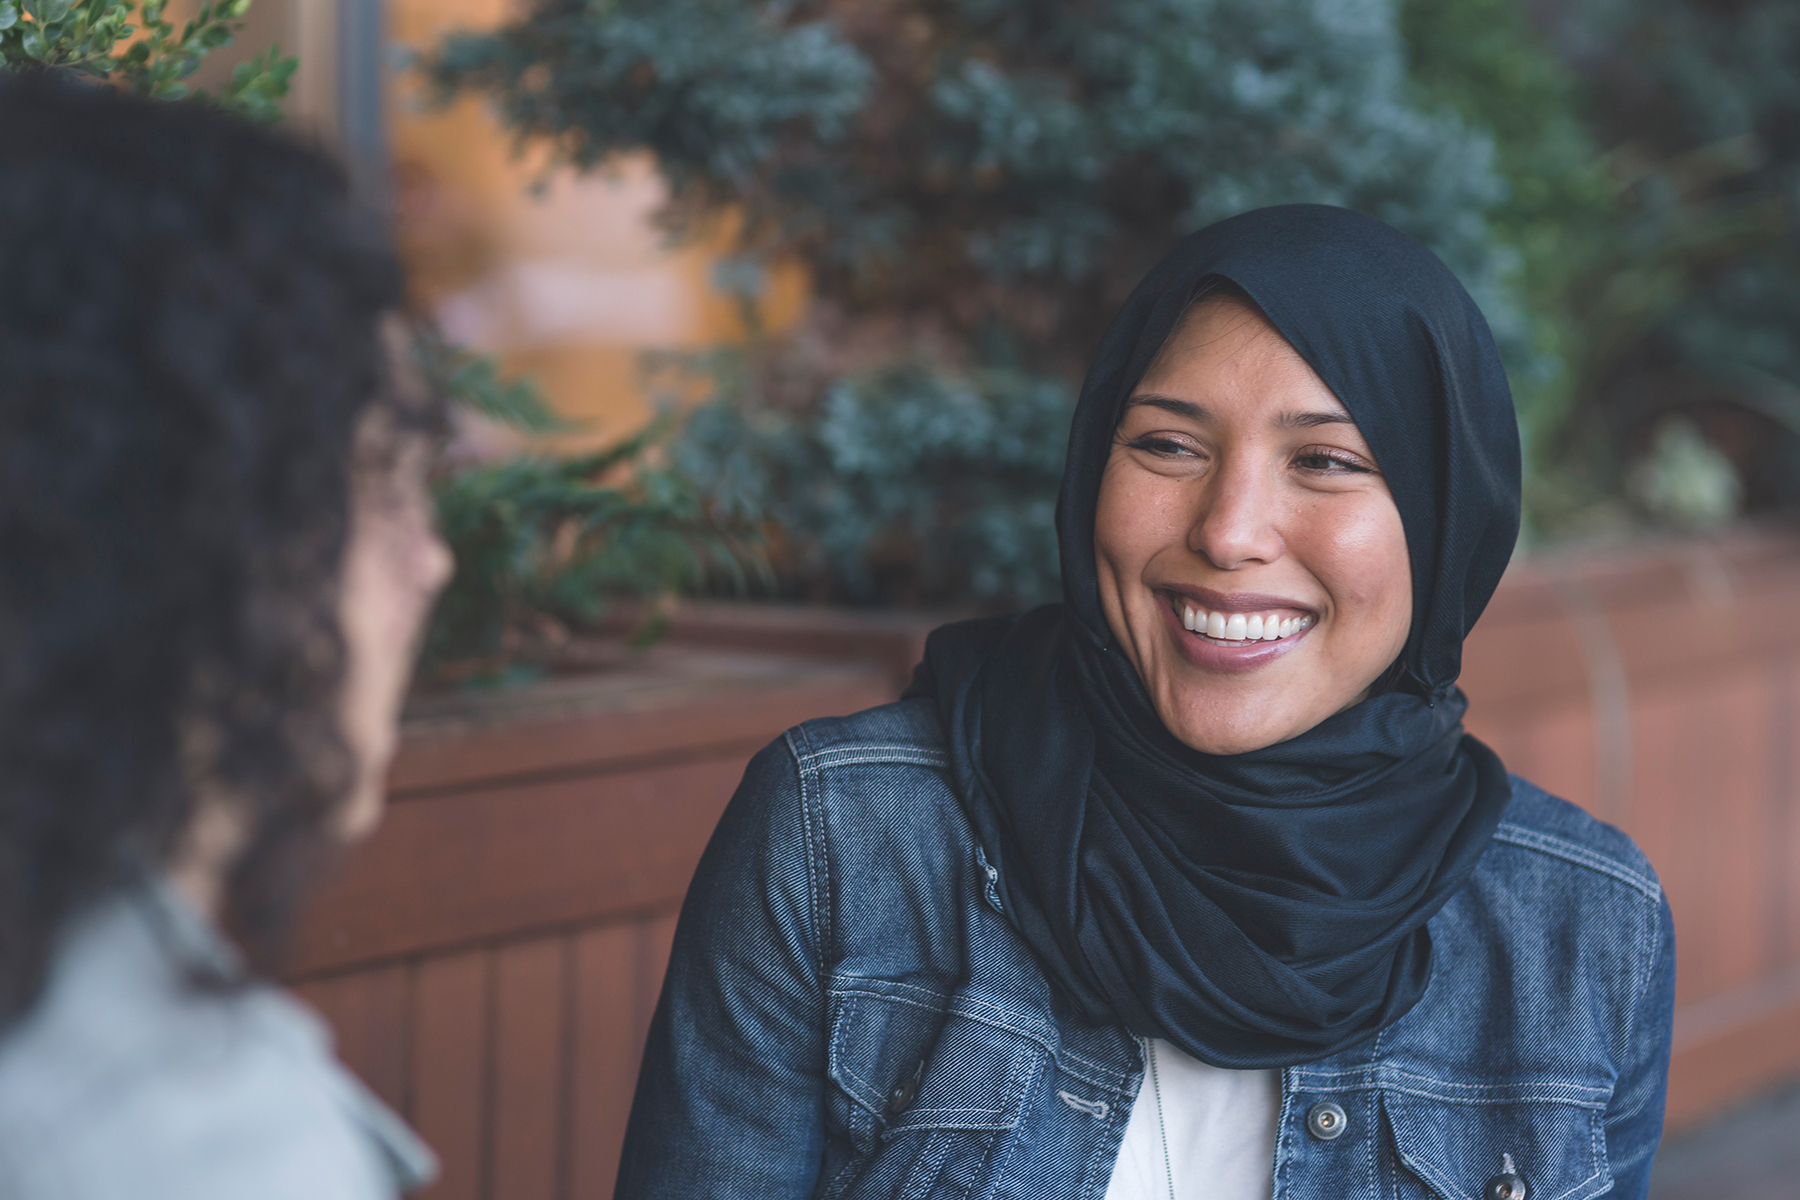 Muslim woman in a scarf smiling at another woman with curly hair whose face isn't shown. 